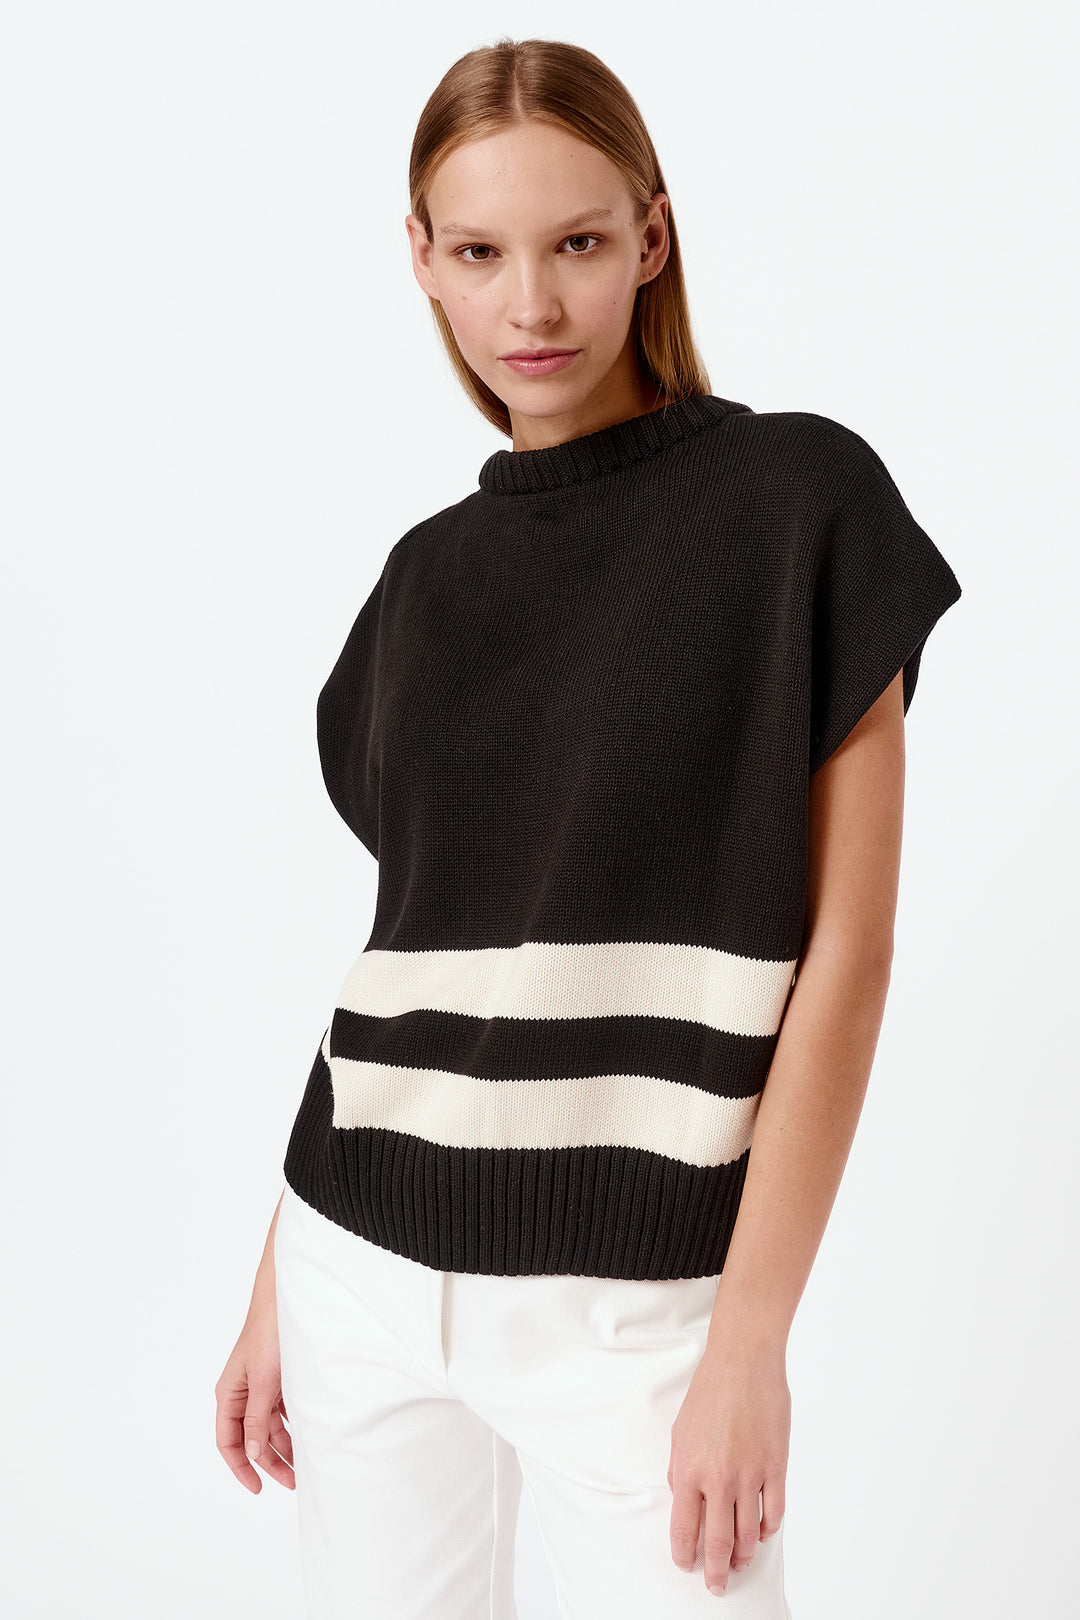 Knitted striped sleeveless top